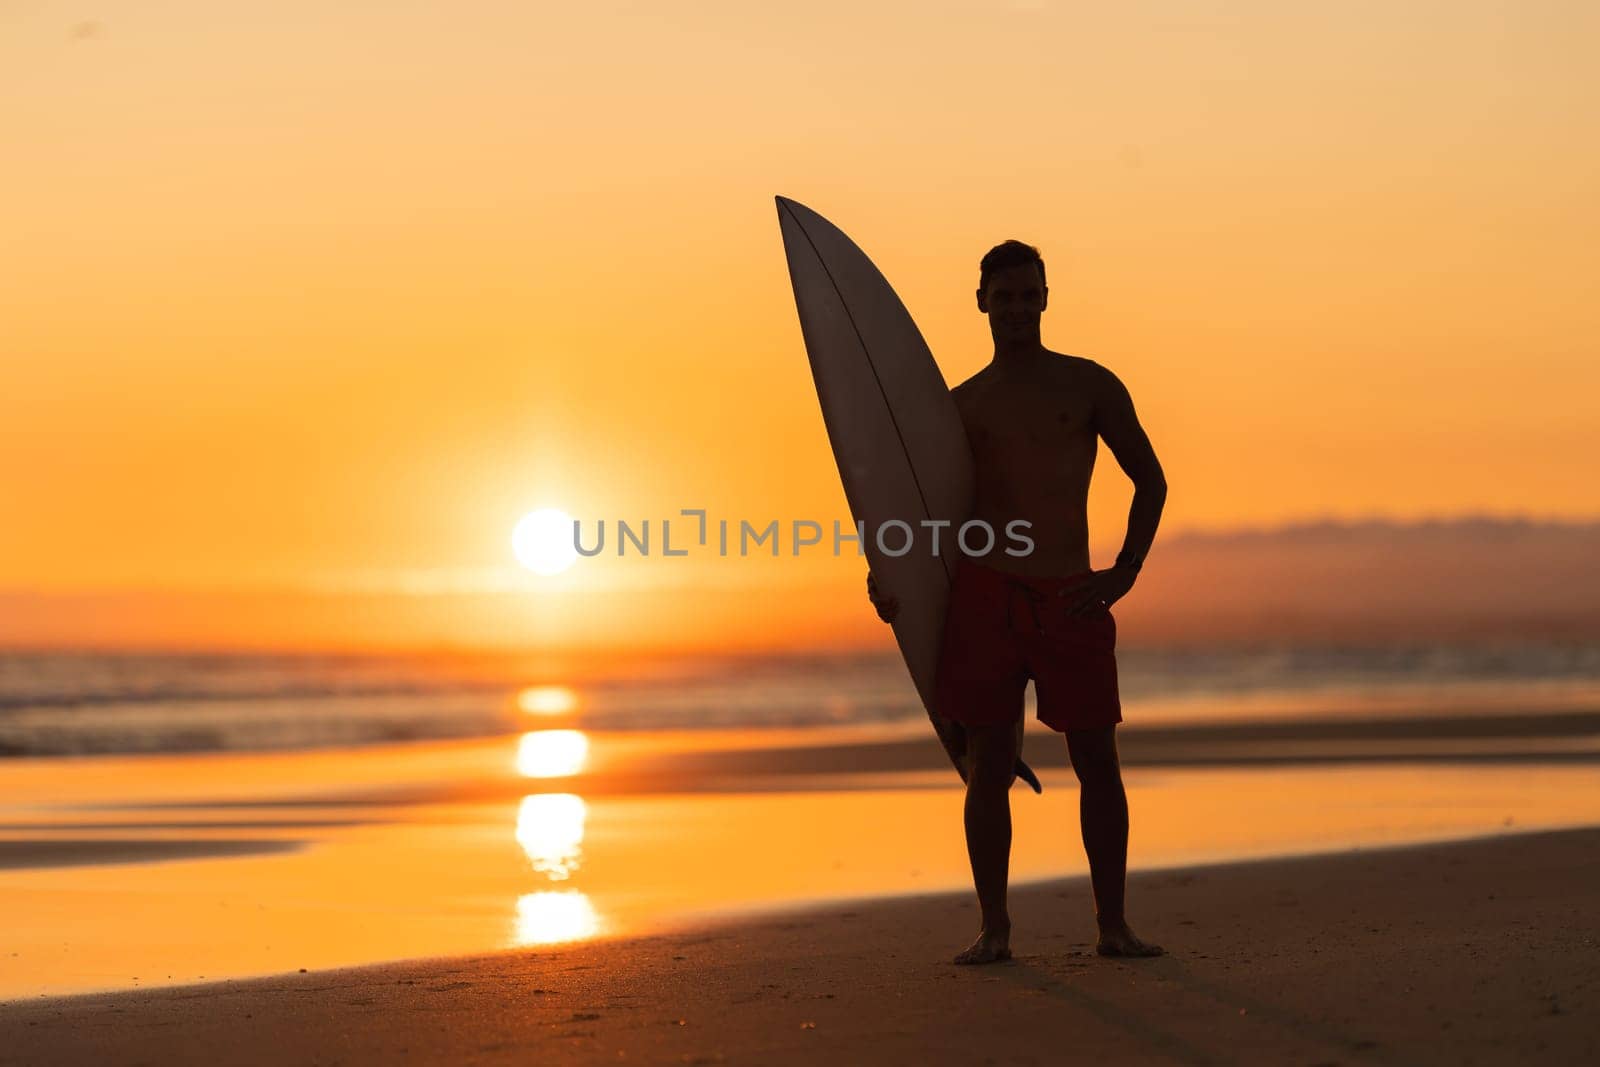 Black silhouette of an attractive man standing on the shore holding a surfboard at orange sunset. Mid shot